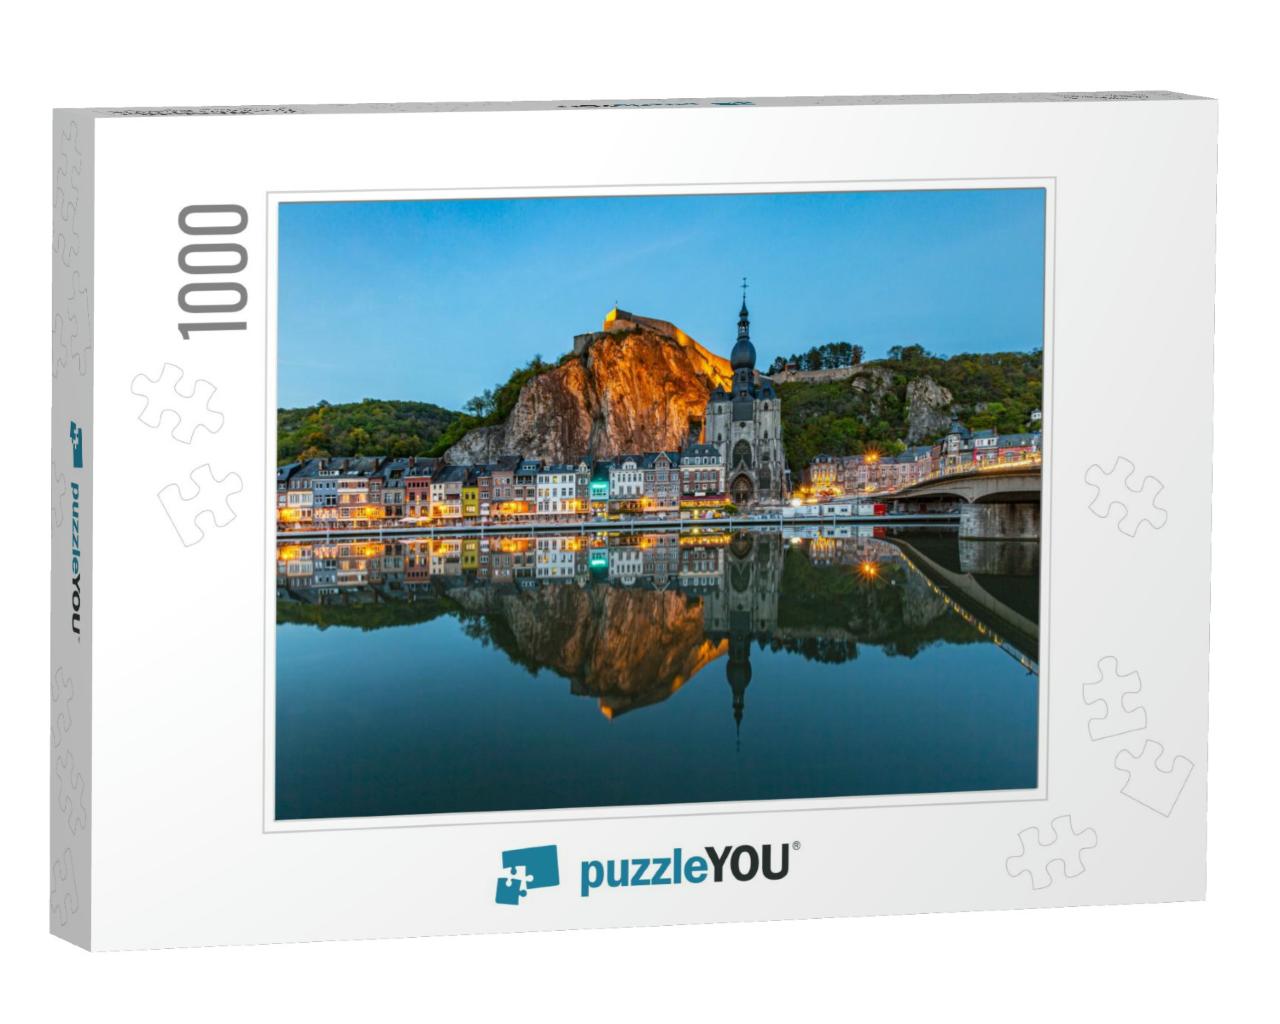 Classic View of the Historic Town of Dinant with Scenic R... Jigsaw Puzzle with 1000 pieces